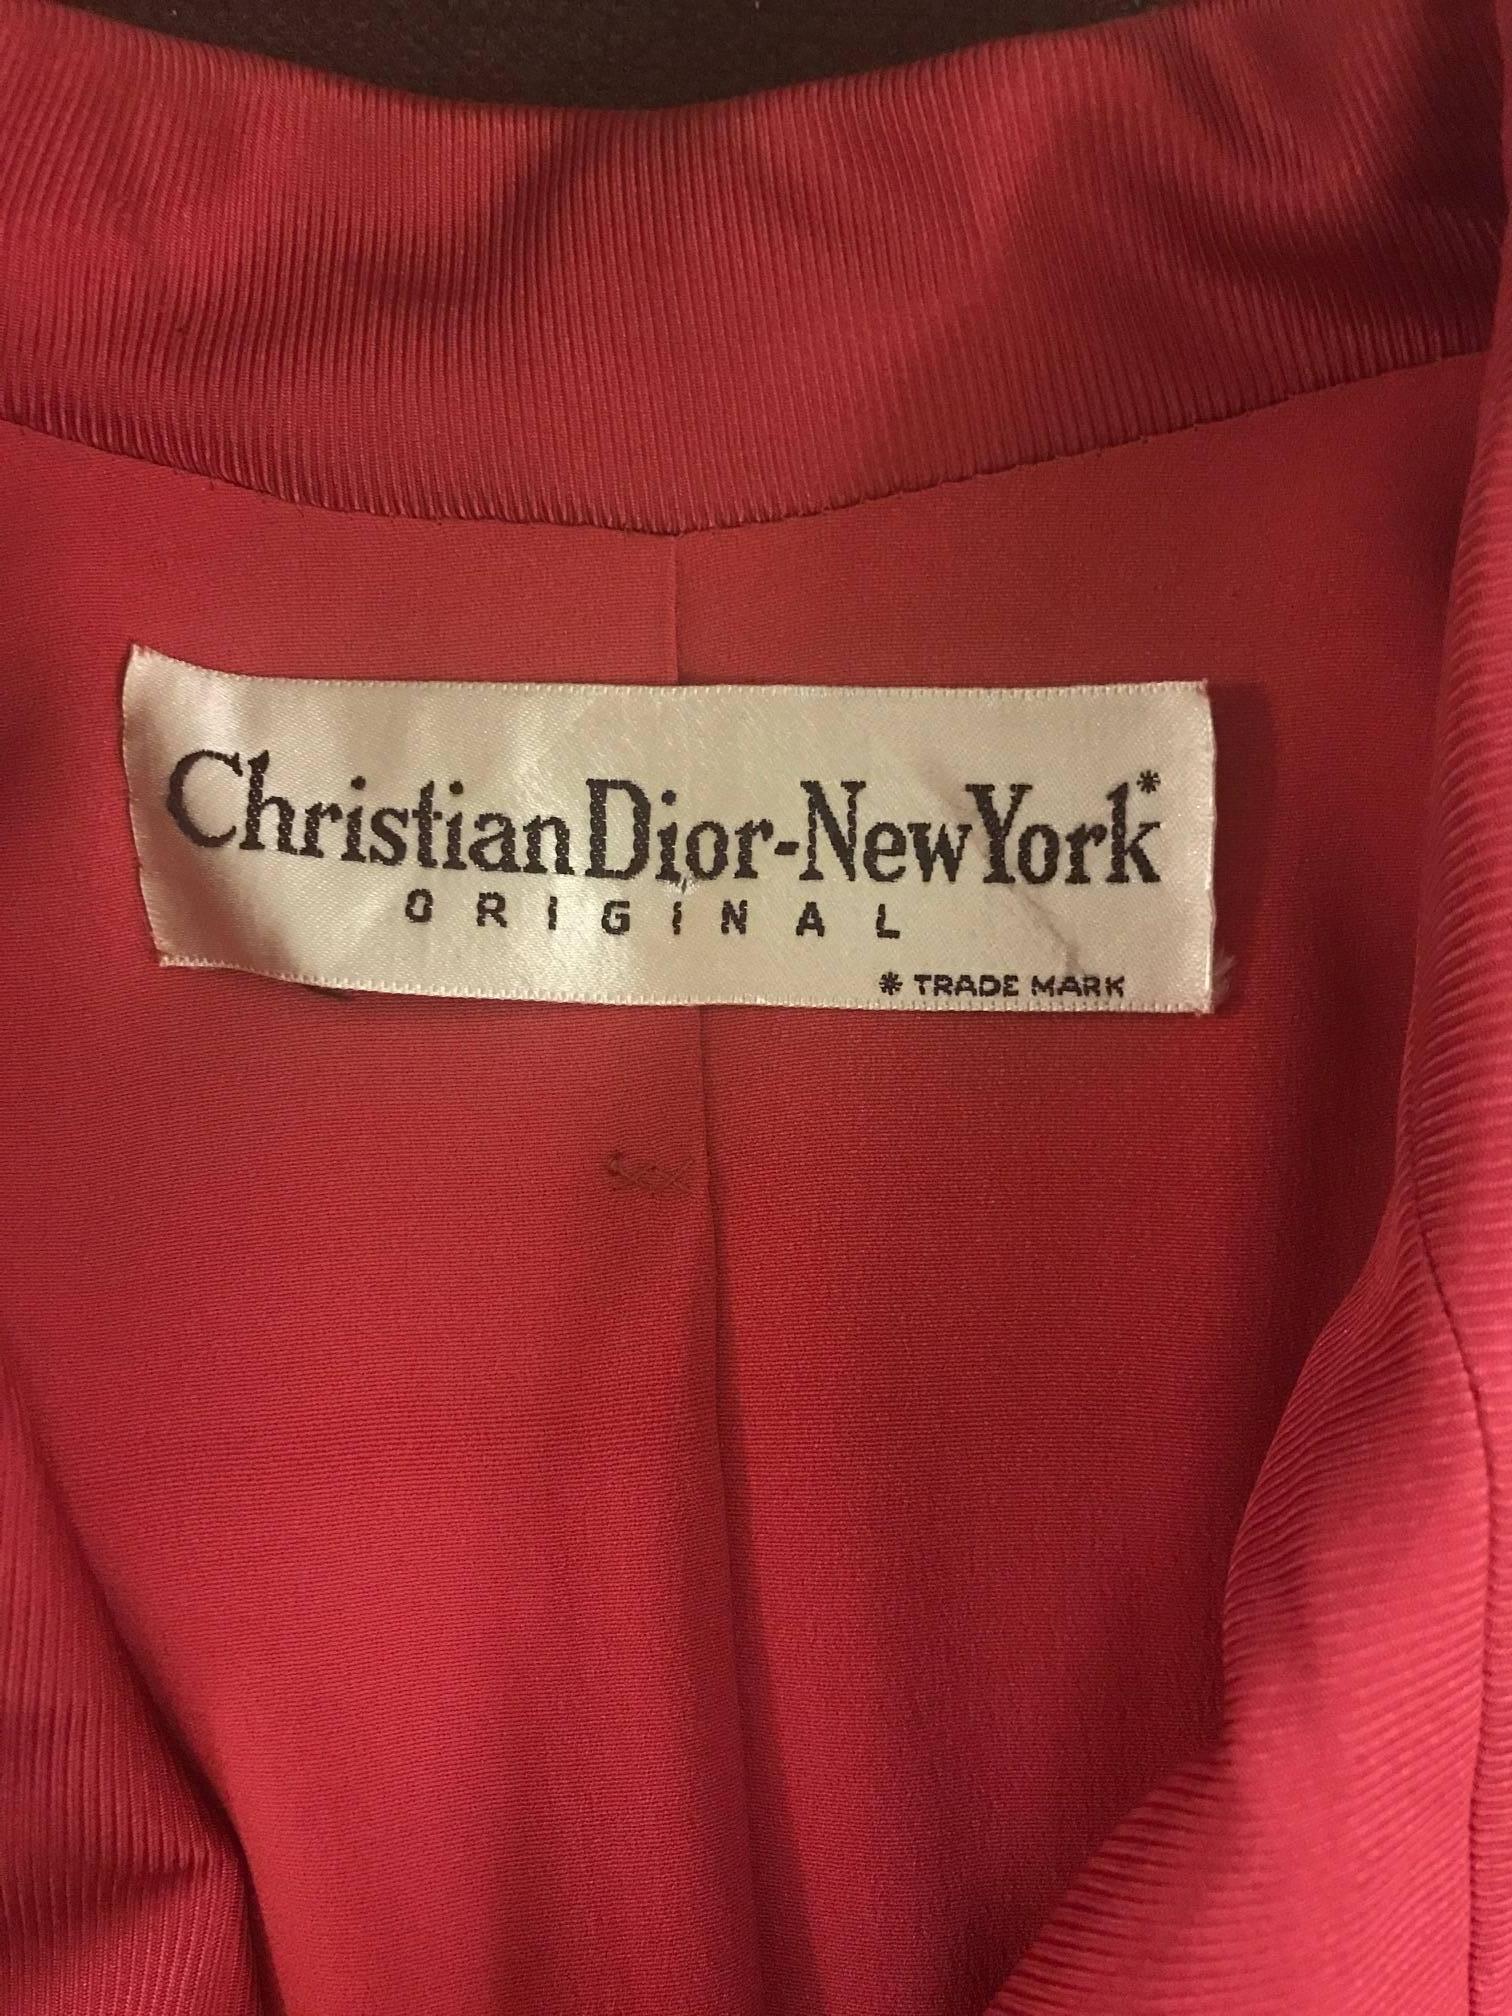 Christian Dior New York Original Early 1950s Red Silk Pencil Skirt Suit 4